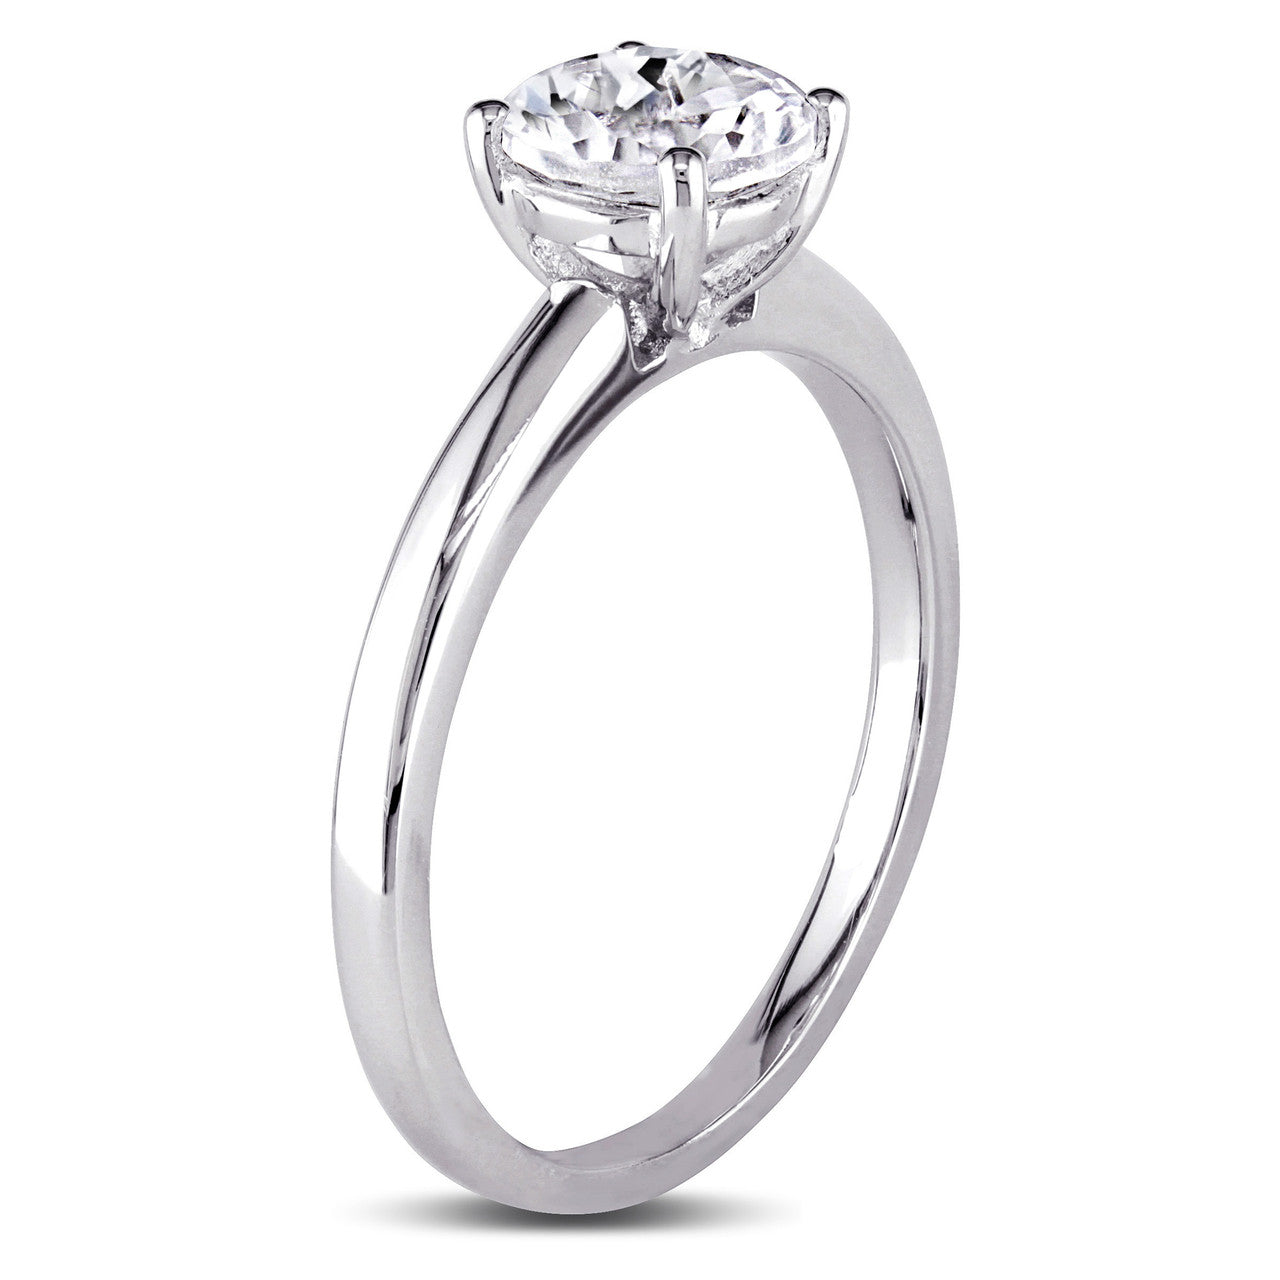 Ice Jewellery 1 1/4 CT TGW Created White Sapphire Solitaire Ring in 10k White Gold - 75000004676 | Ice Jewellery Australia